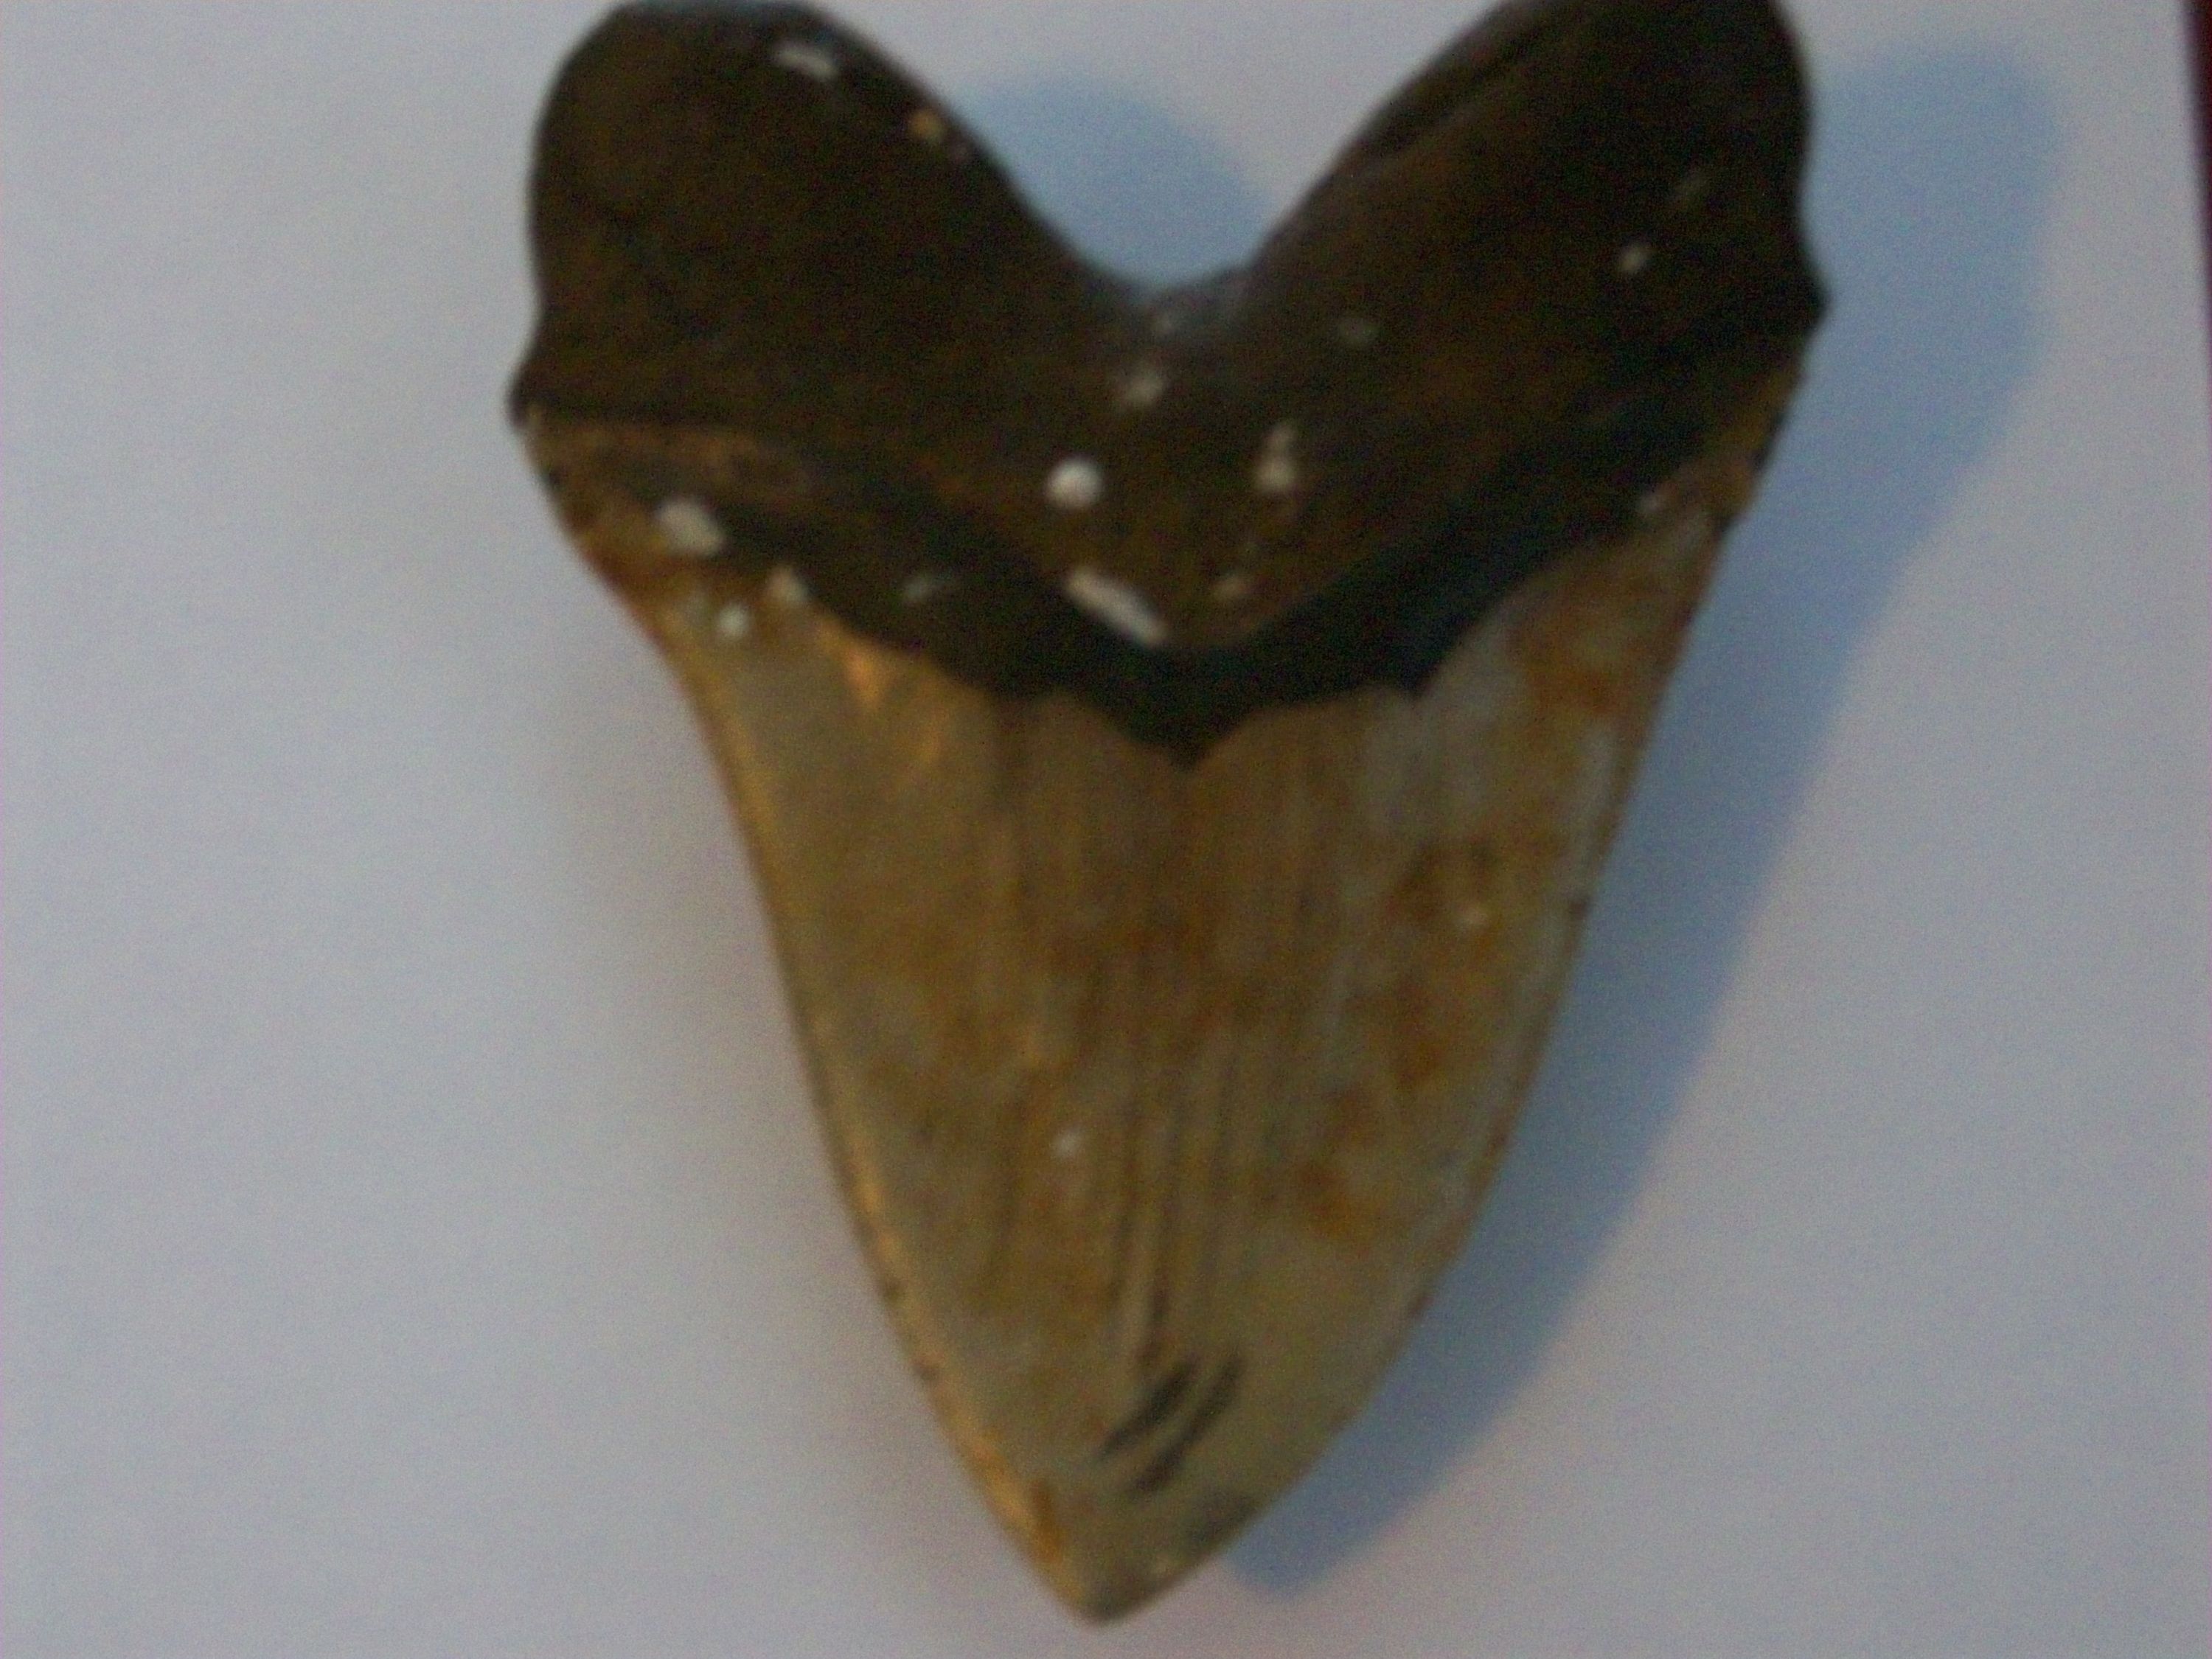 Giant tooth